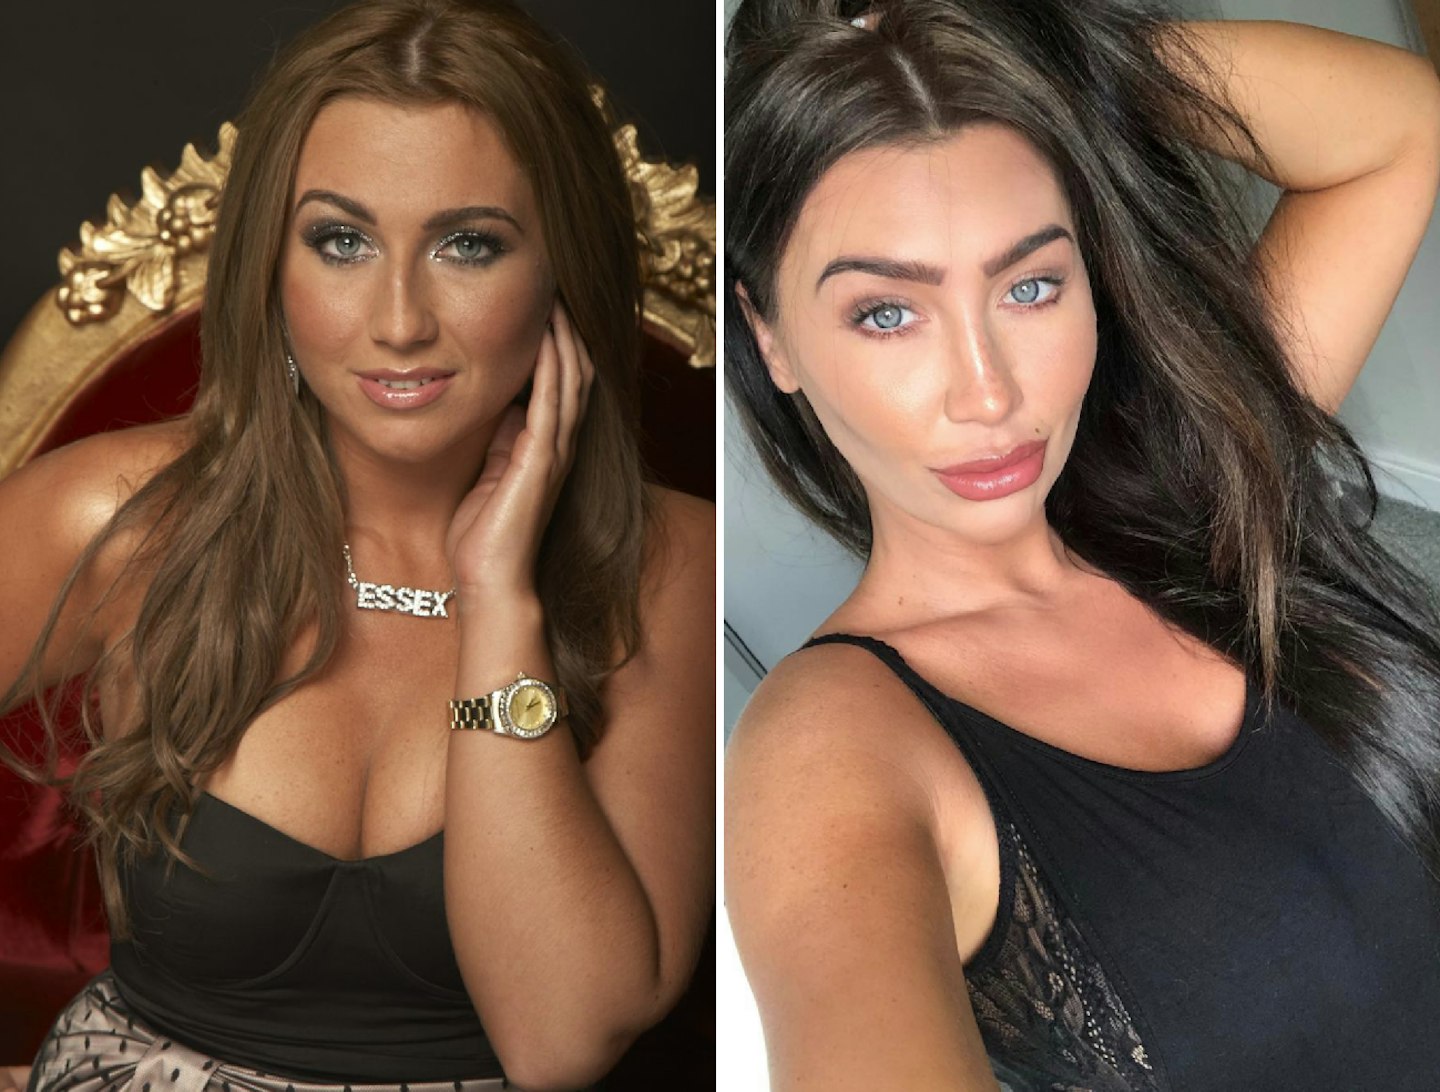 Lauren Goodger before and after plastic surgery